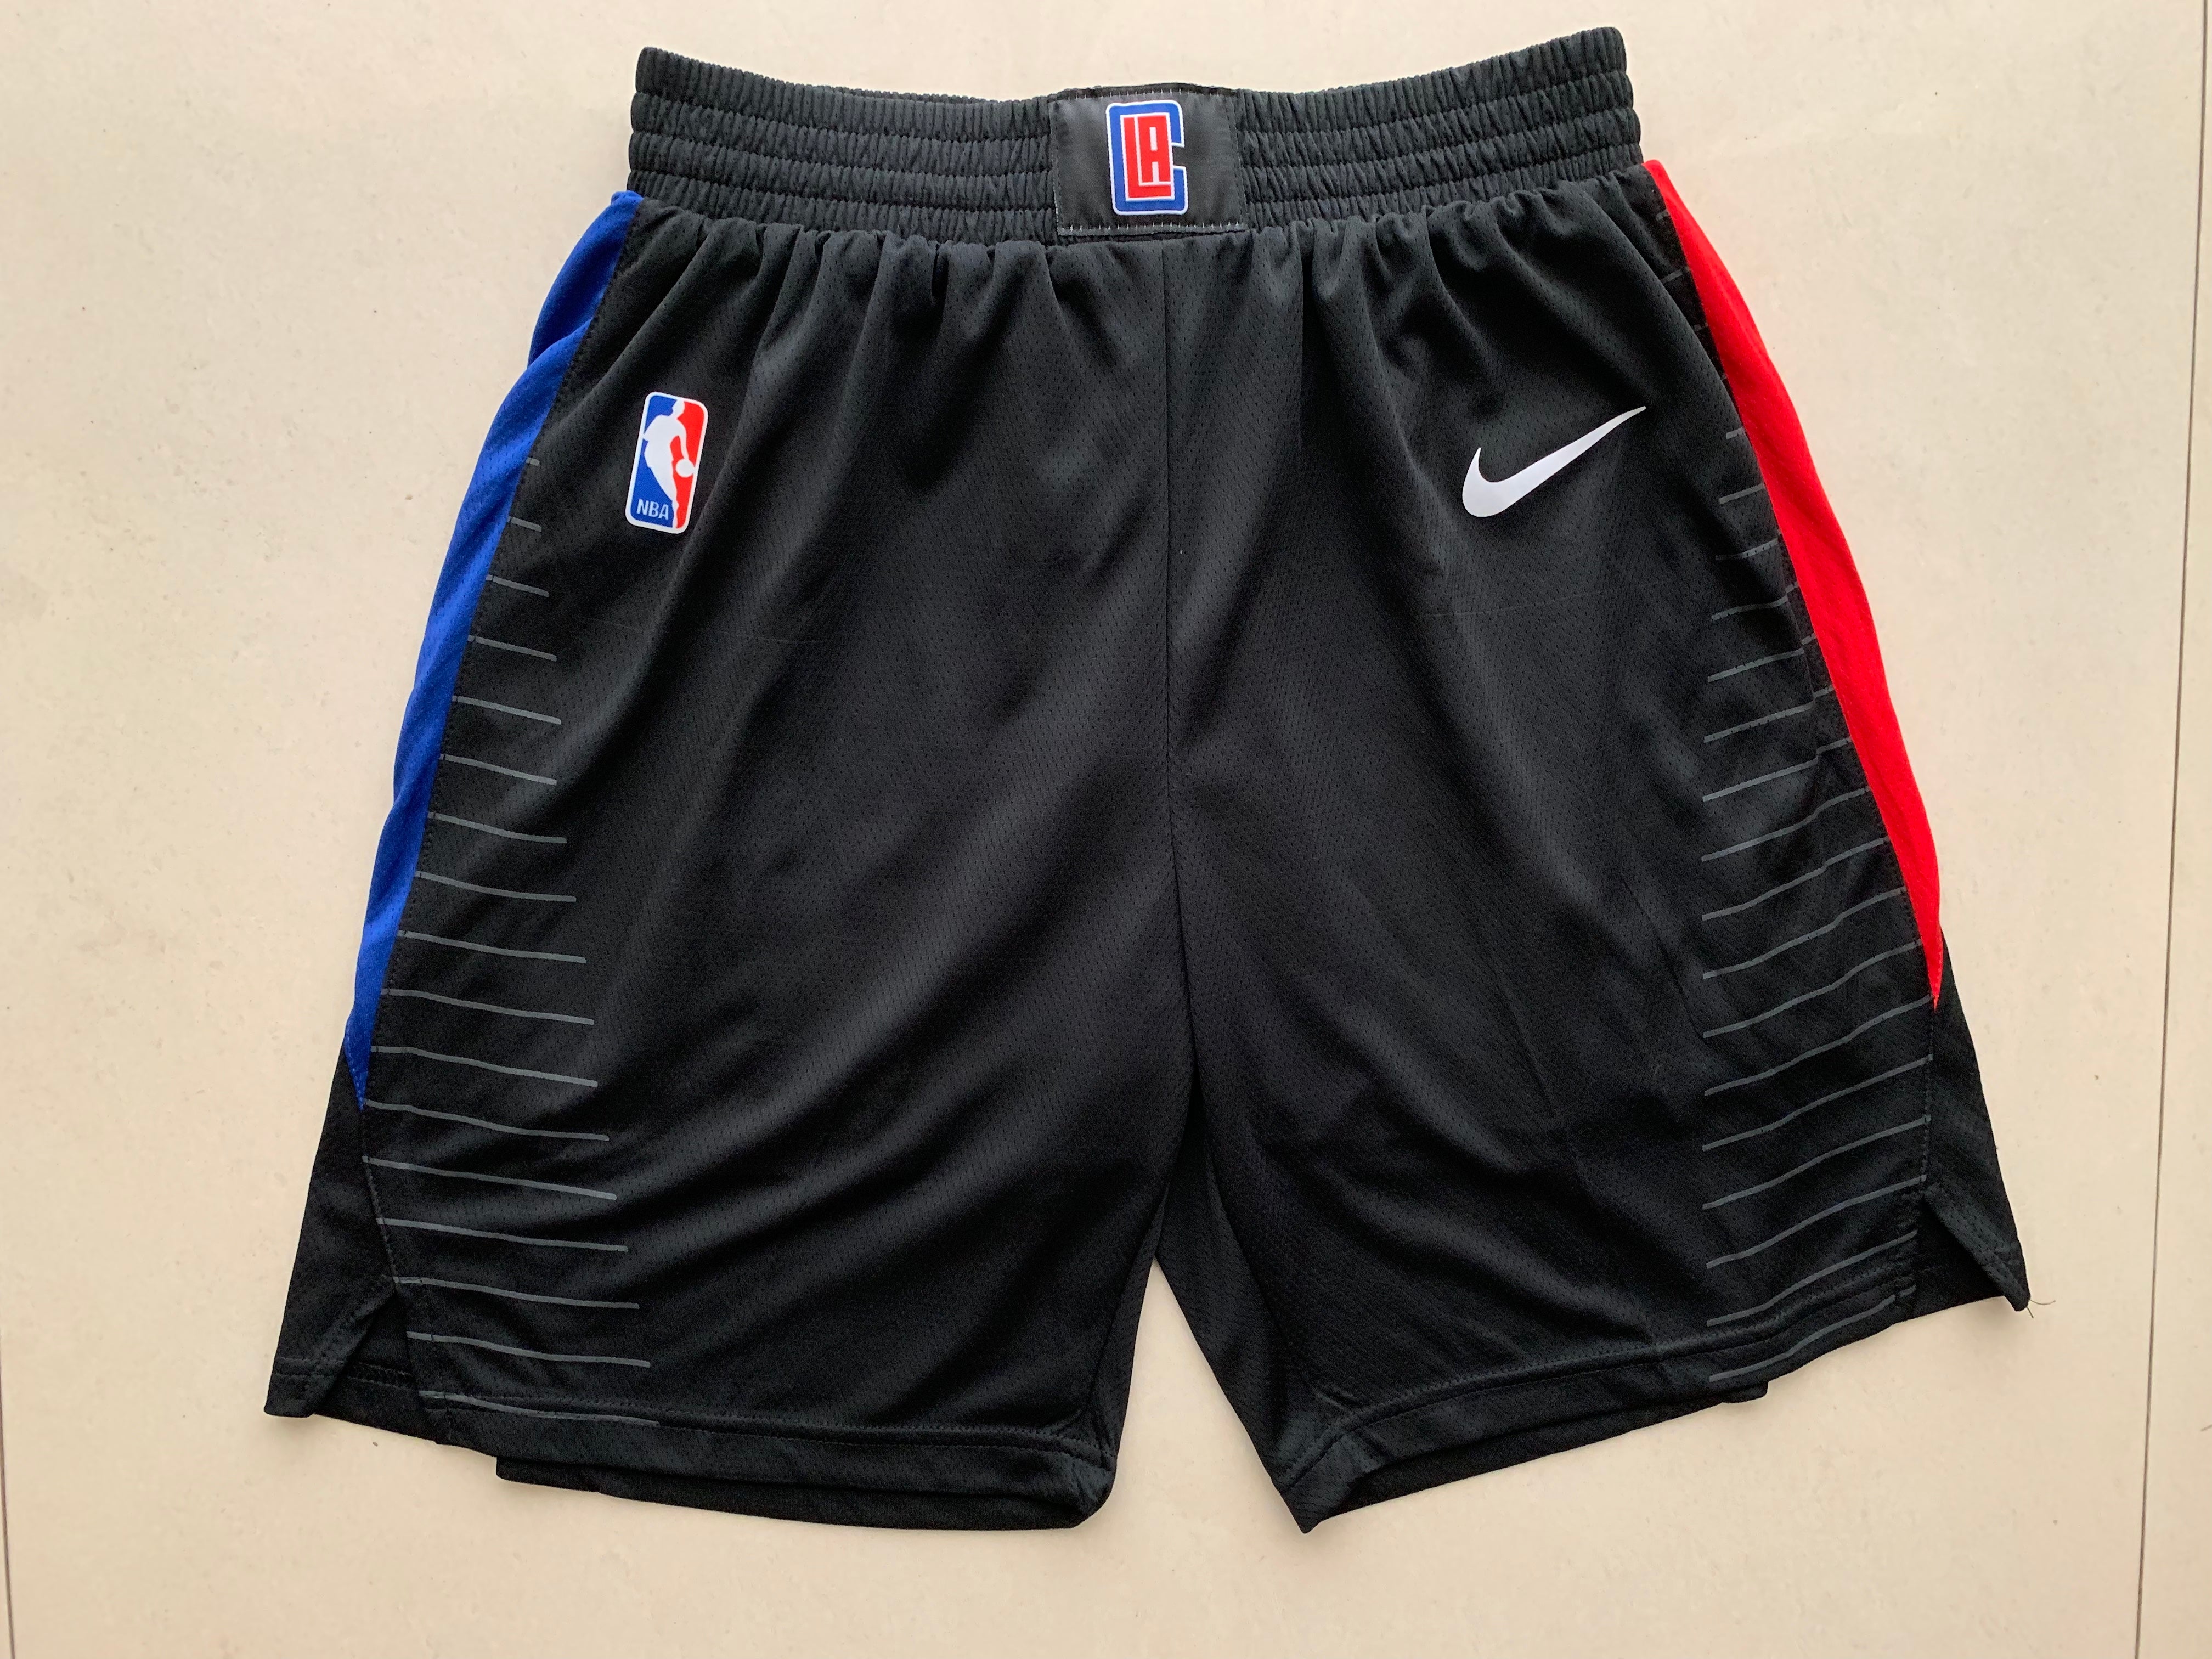 Clippers black shorts